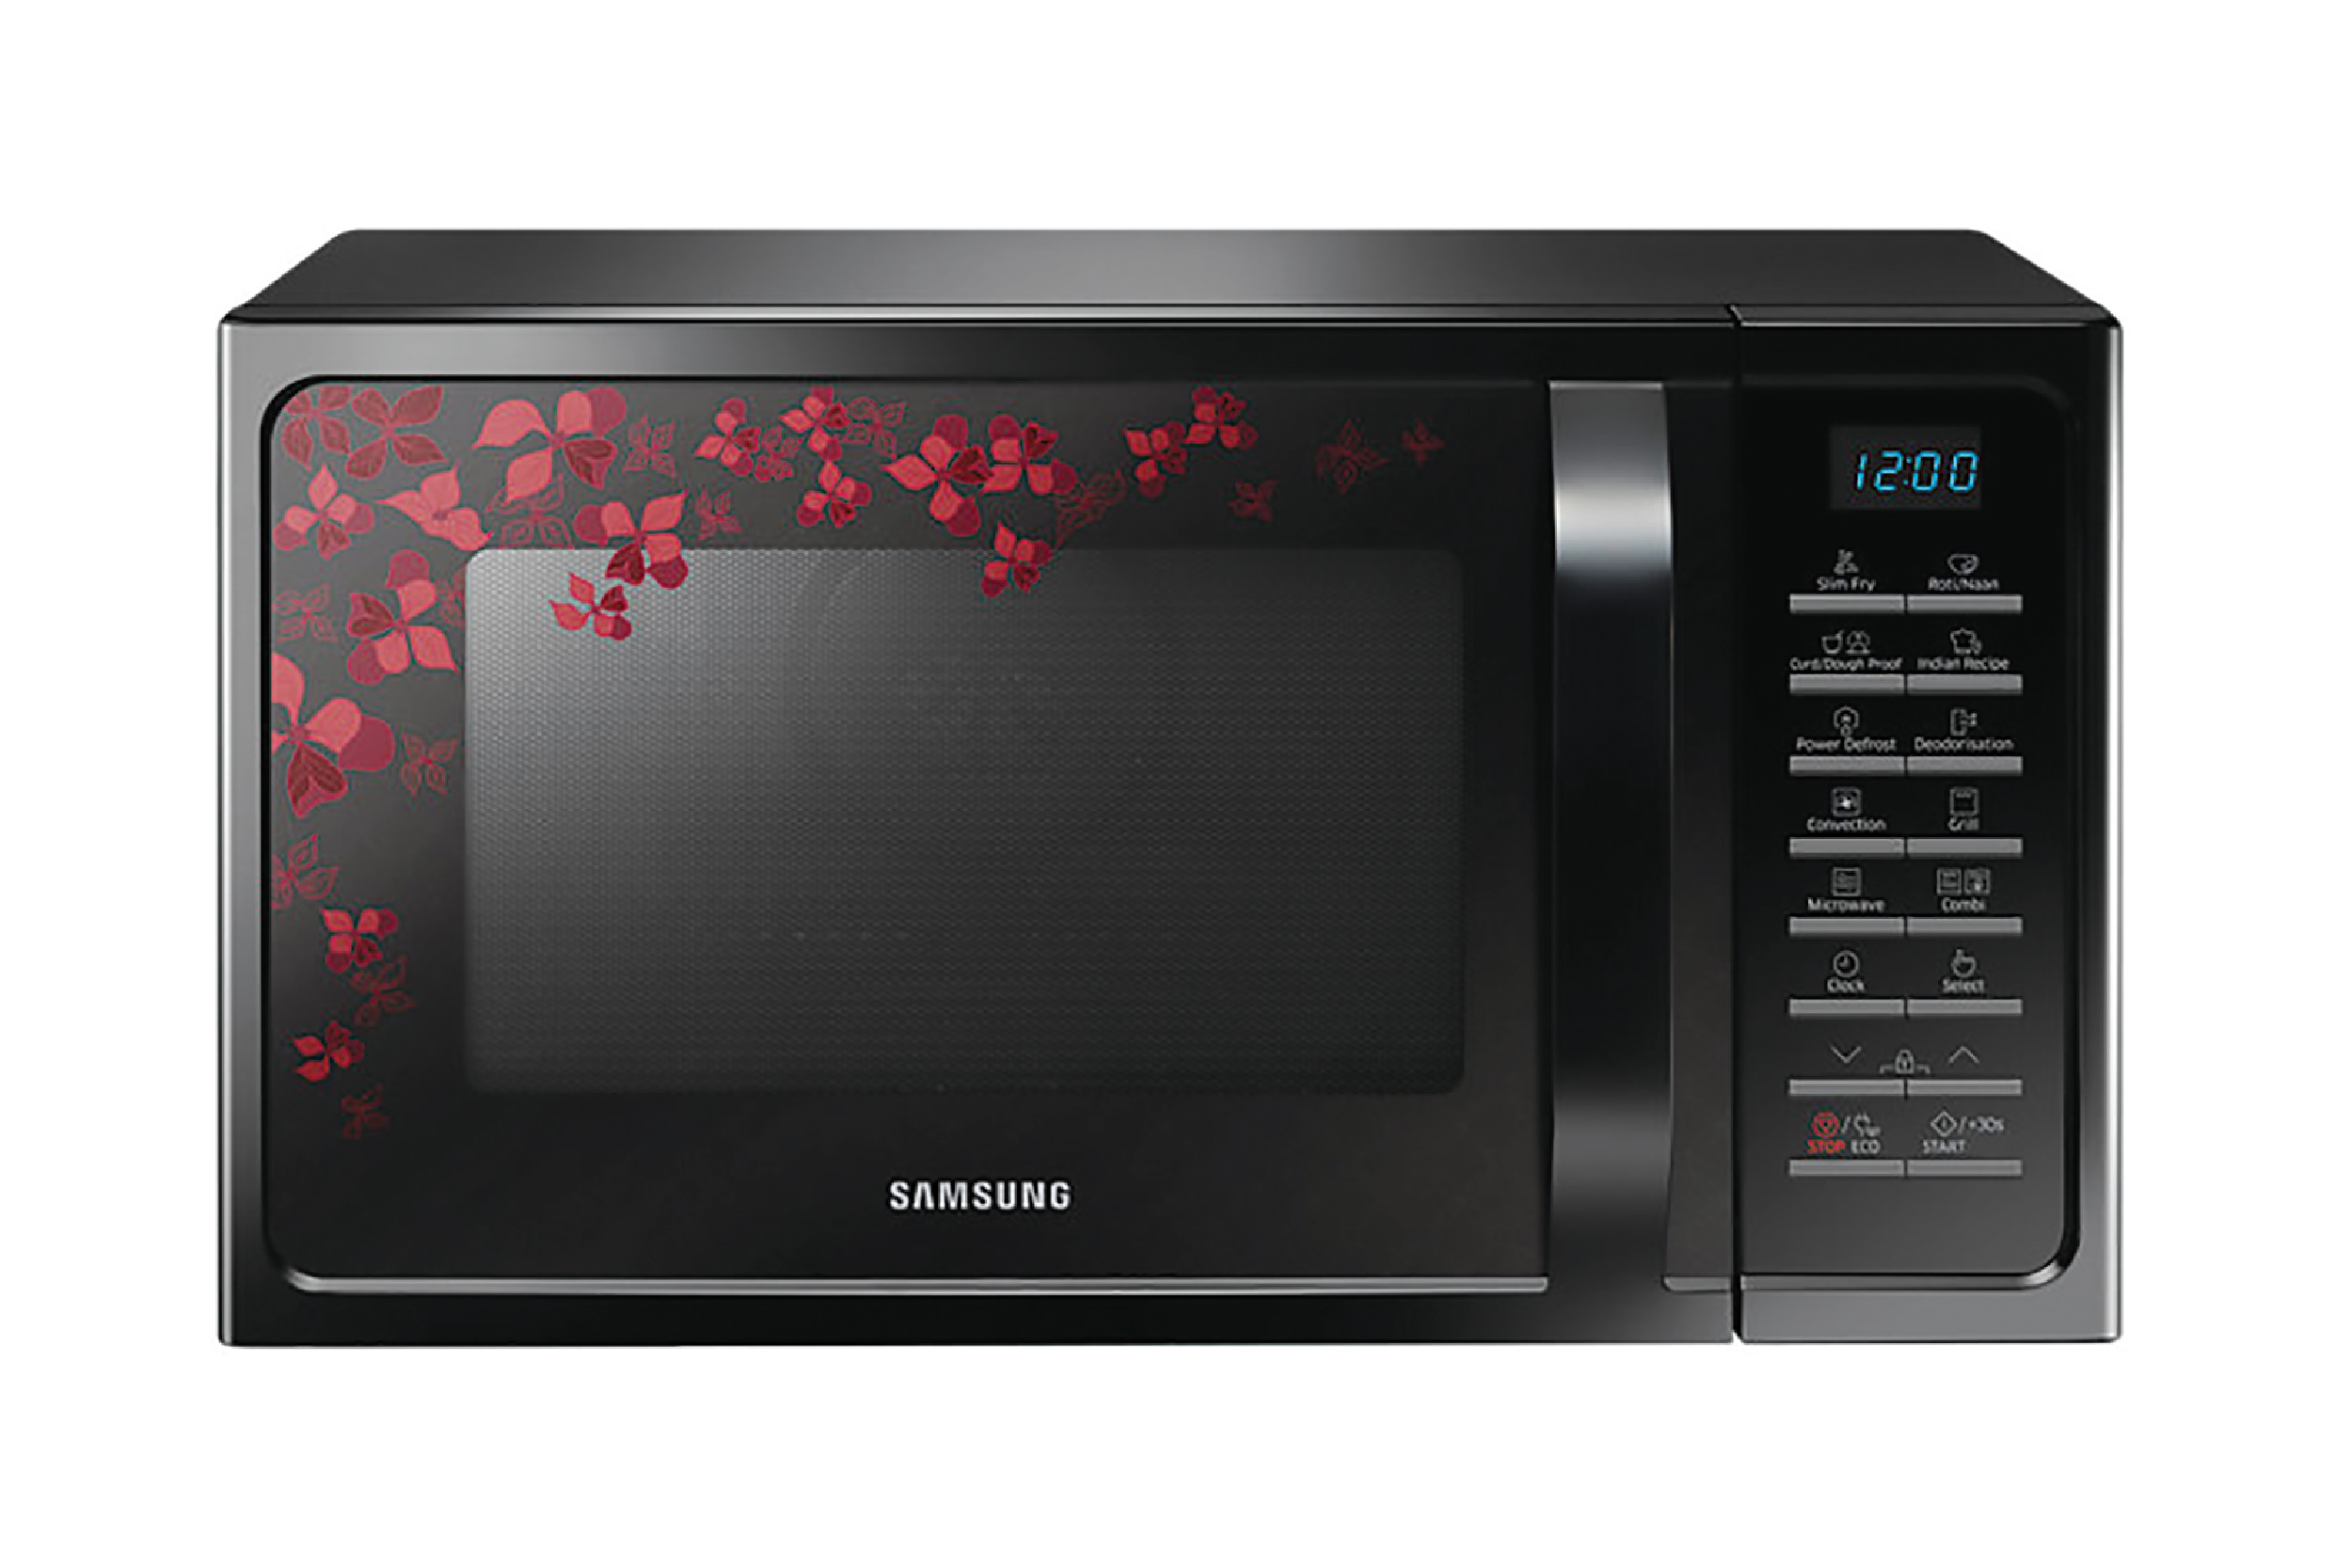 Samsung 28 LTR MC28H5025VB Convection Microwave Oven 
